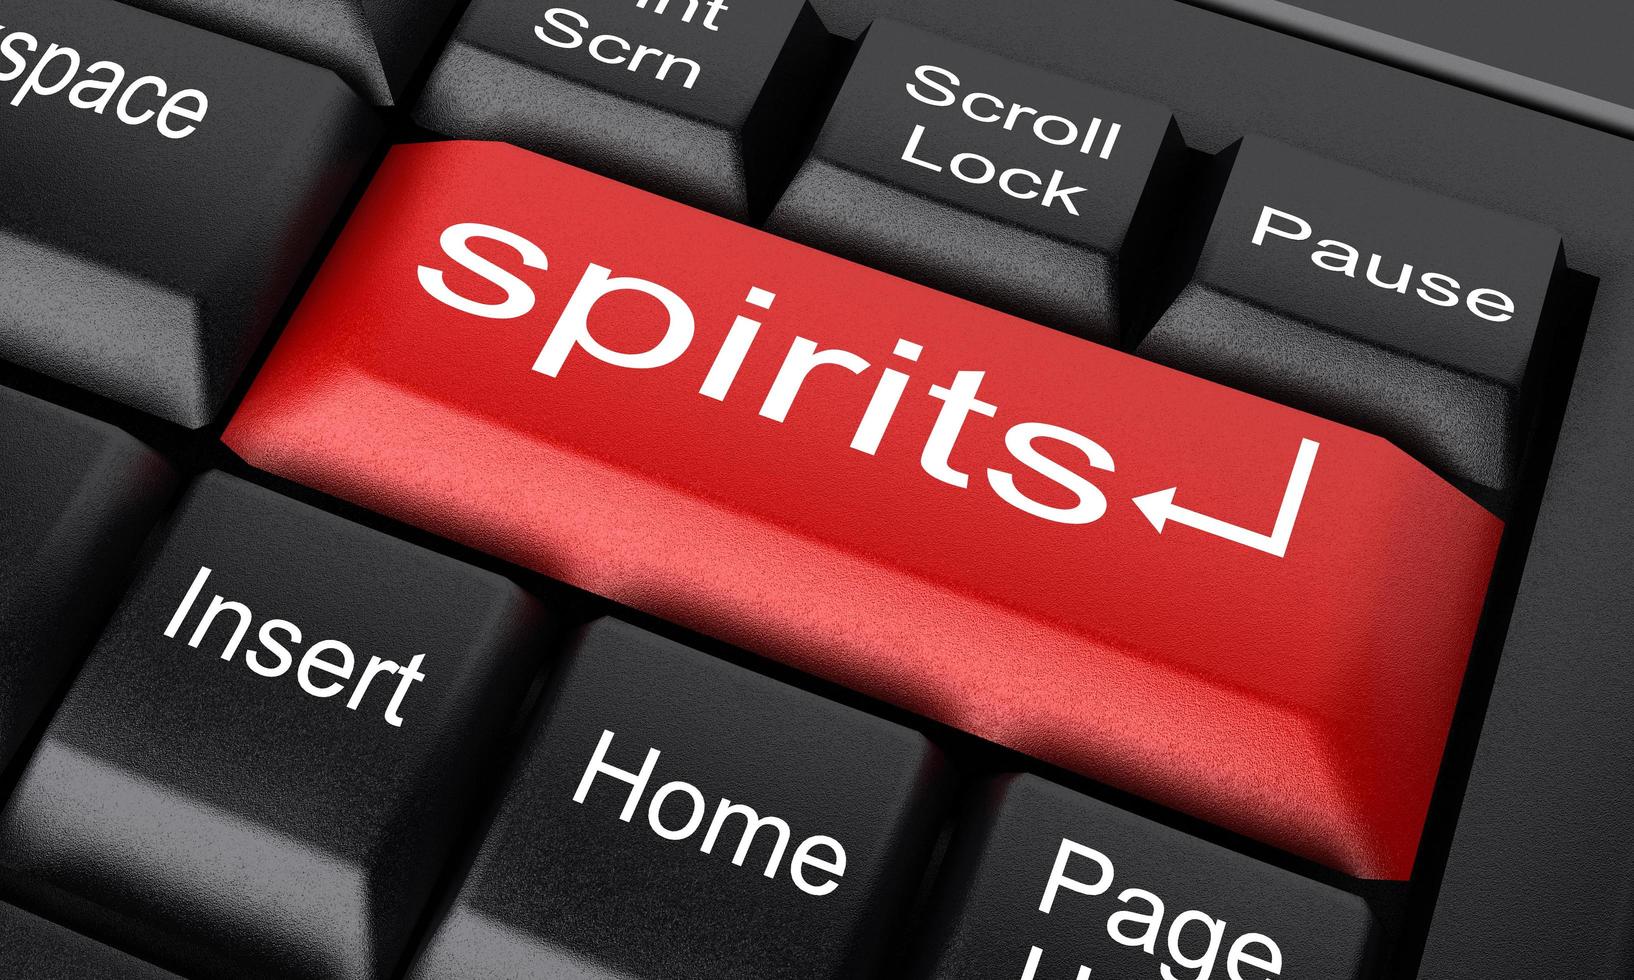 spirits word on red keyboard button photo